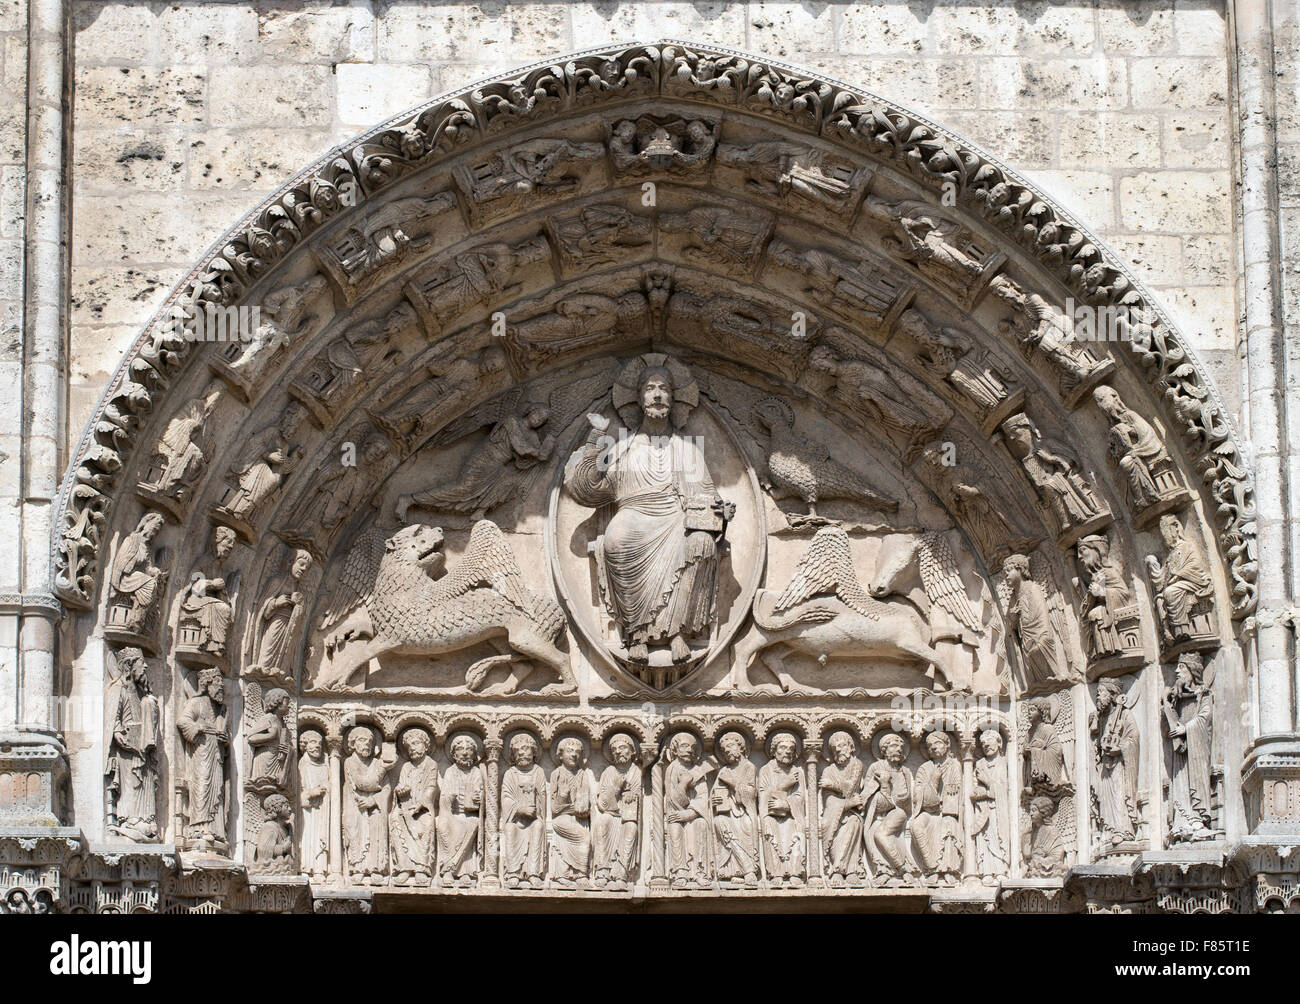 The central tympanum depicting christ and the apocalypse, Chartres cathedral west transept,  Eure-et-Loir, France, Europe Stock Photo